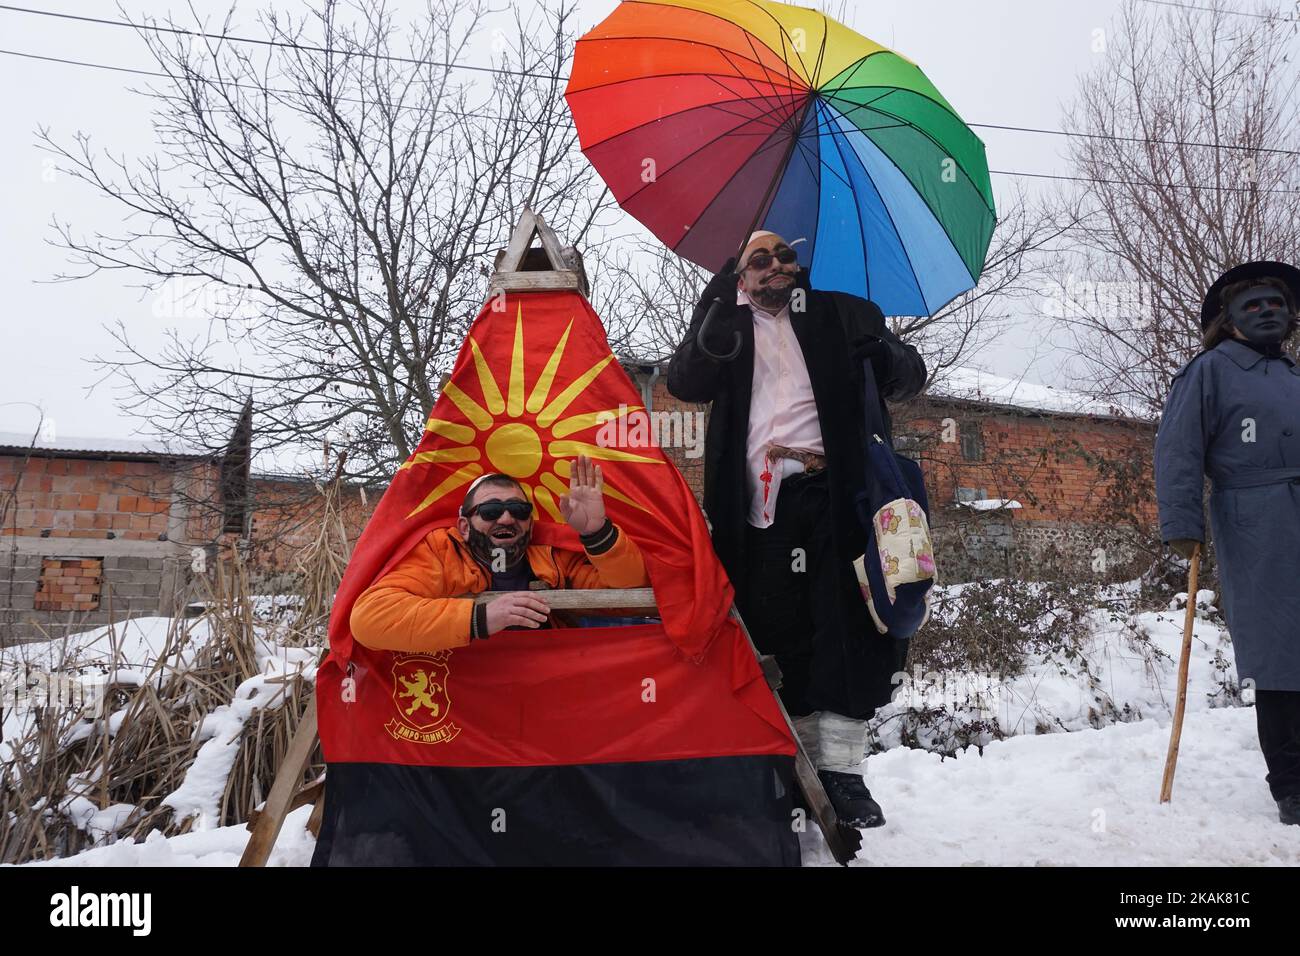 Local villagers wearing homemade costumes parade during a carnival celebration marking the Orthodox St. Vasilij Day in the village of Vevcani, about 170 km from the capital of Skopje, The Former Yugoslav Republic of Macedonia on 13 January 2017. The Vevcani Carnival is one of the most famous village festivals in the Balkans. It is believed that the custom is over 1,400 years old. (Photo by Borce Popovski/NurPhoto) *** Please Use Credit from Credit Field *** Stock Photo